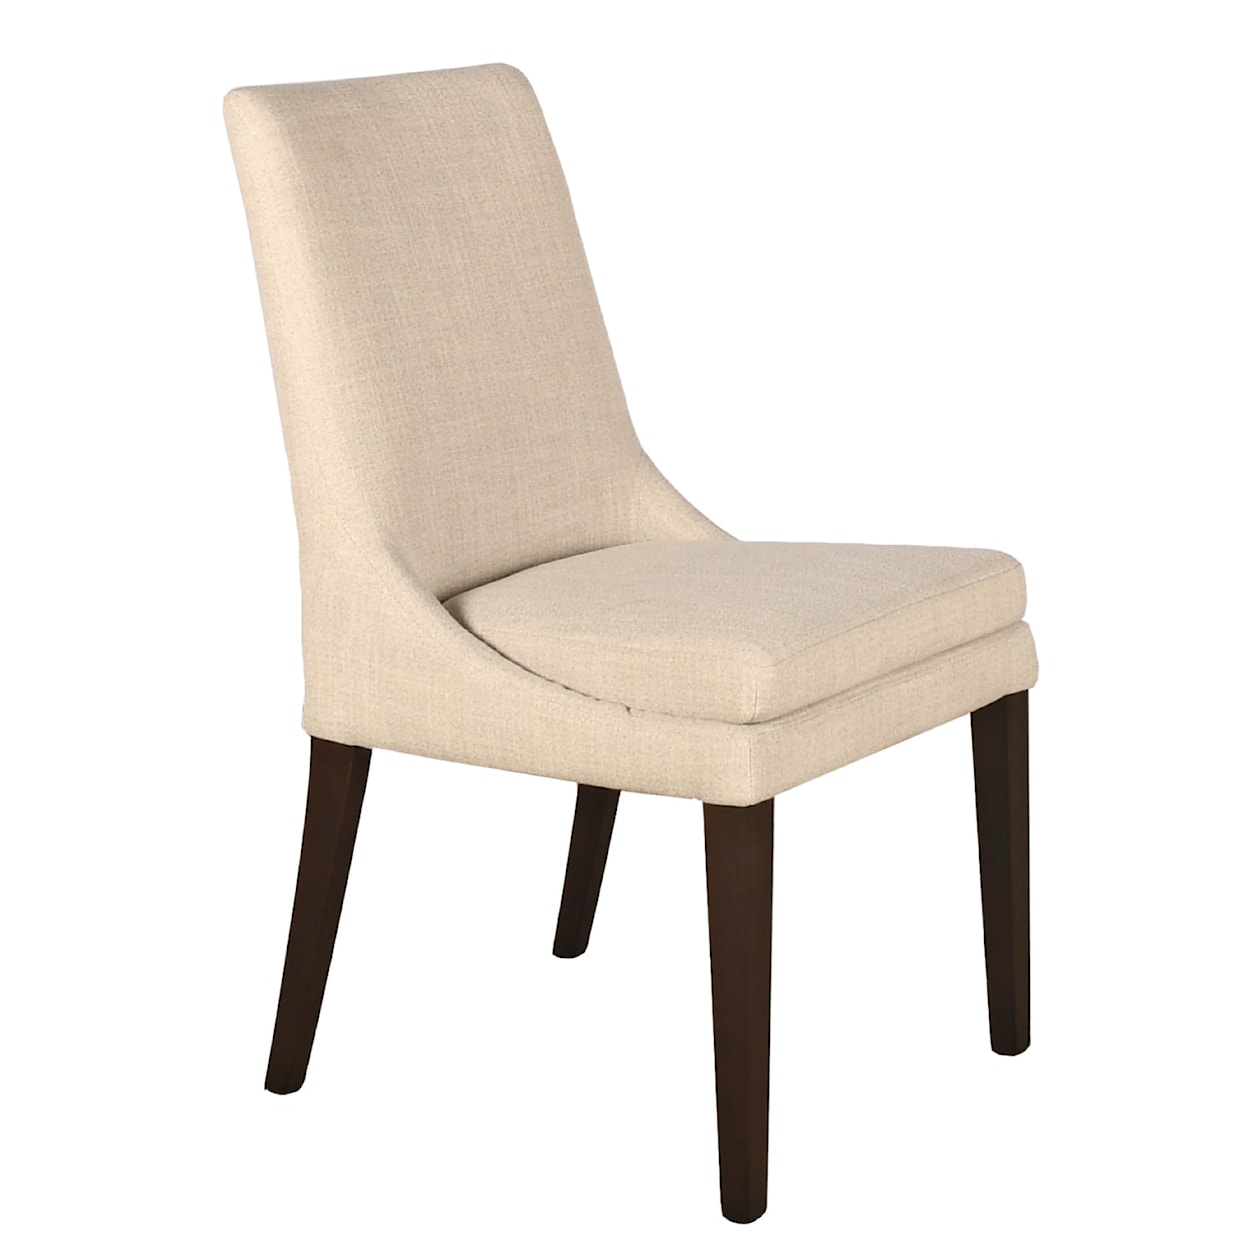 Maric Furniture Dining Chairs Upholstered Dining Chair